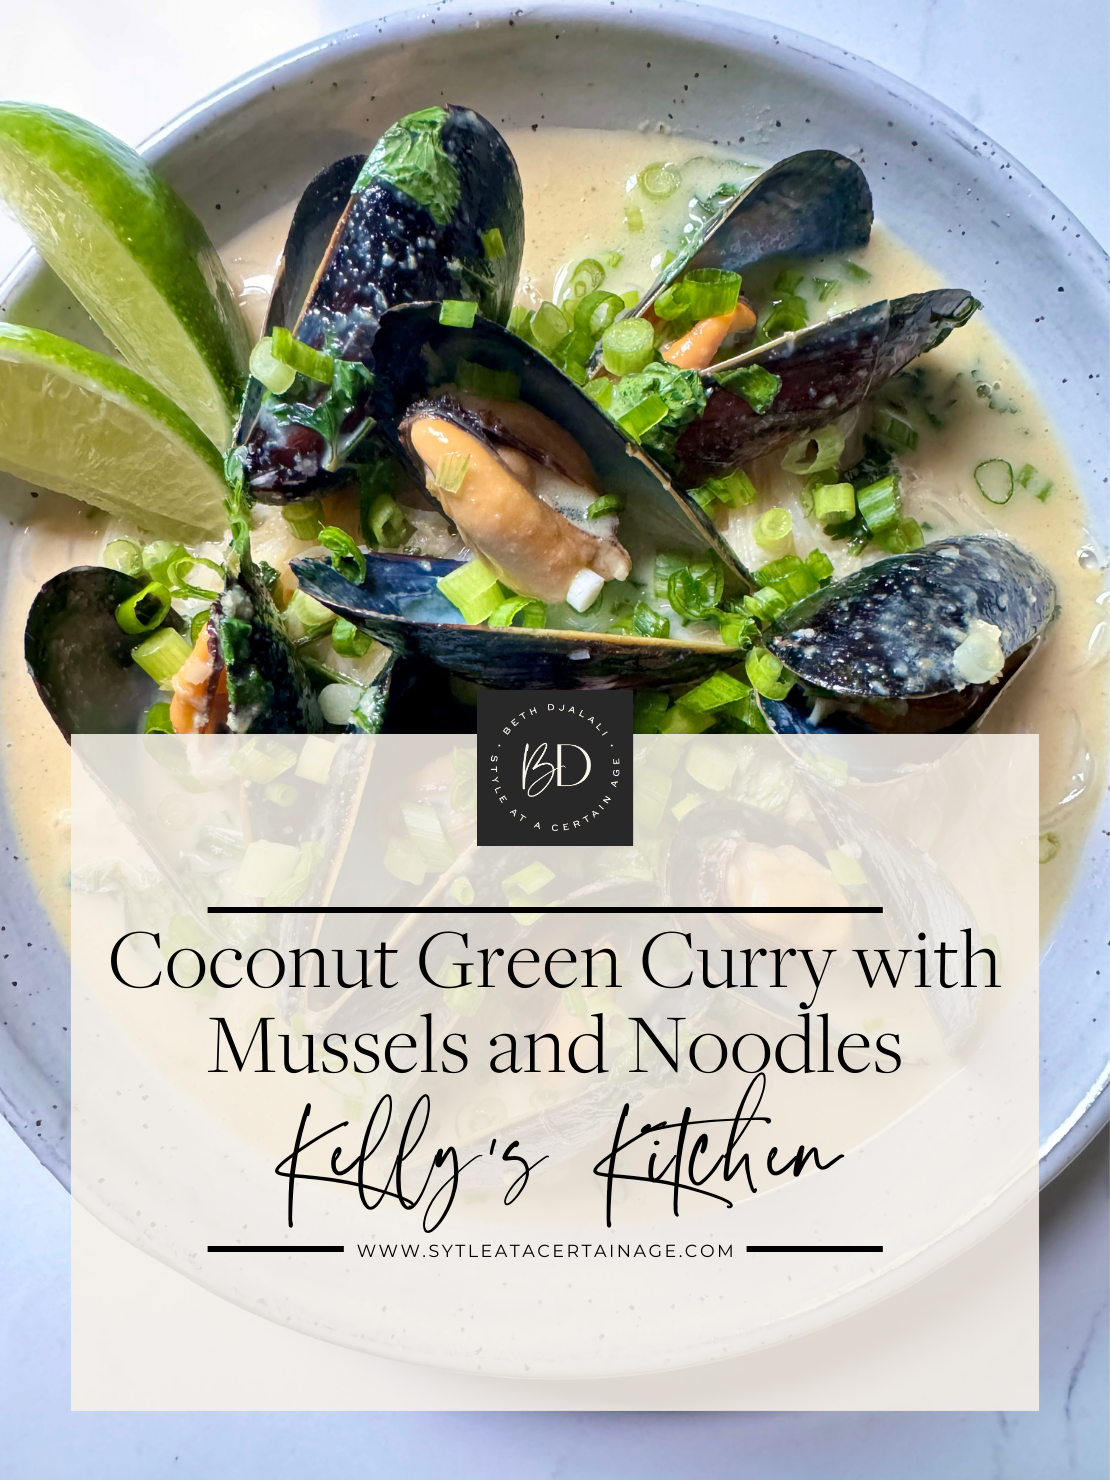 Coconut Green Curry with Mussels and Noodles: A Perfect Dummer Dish